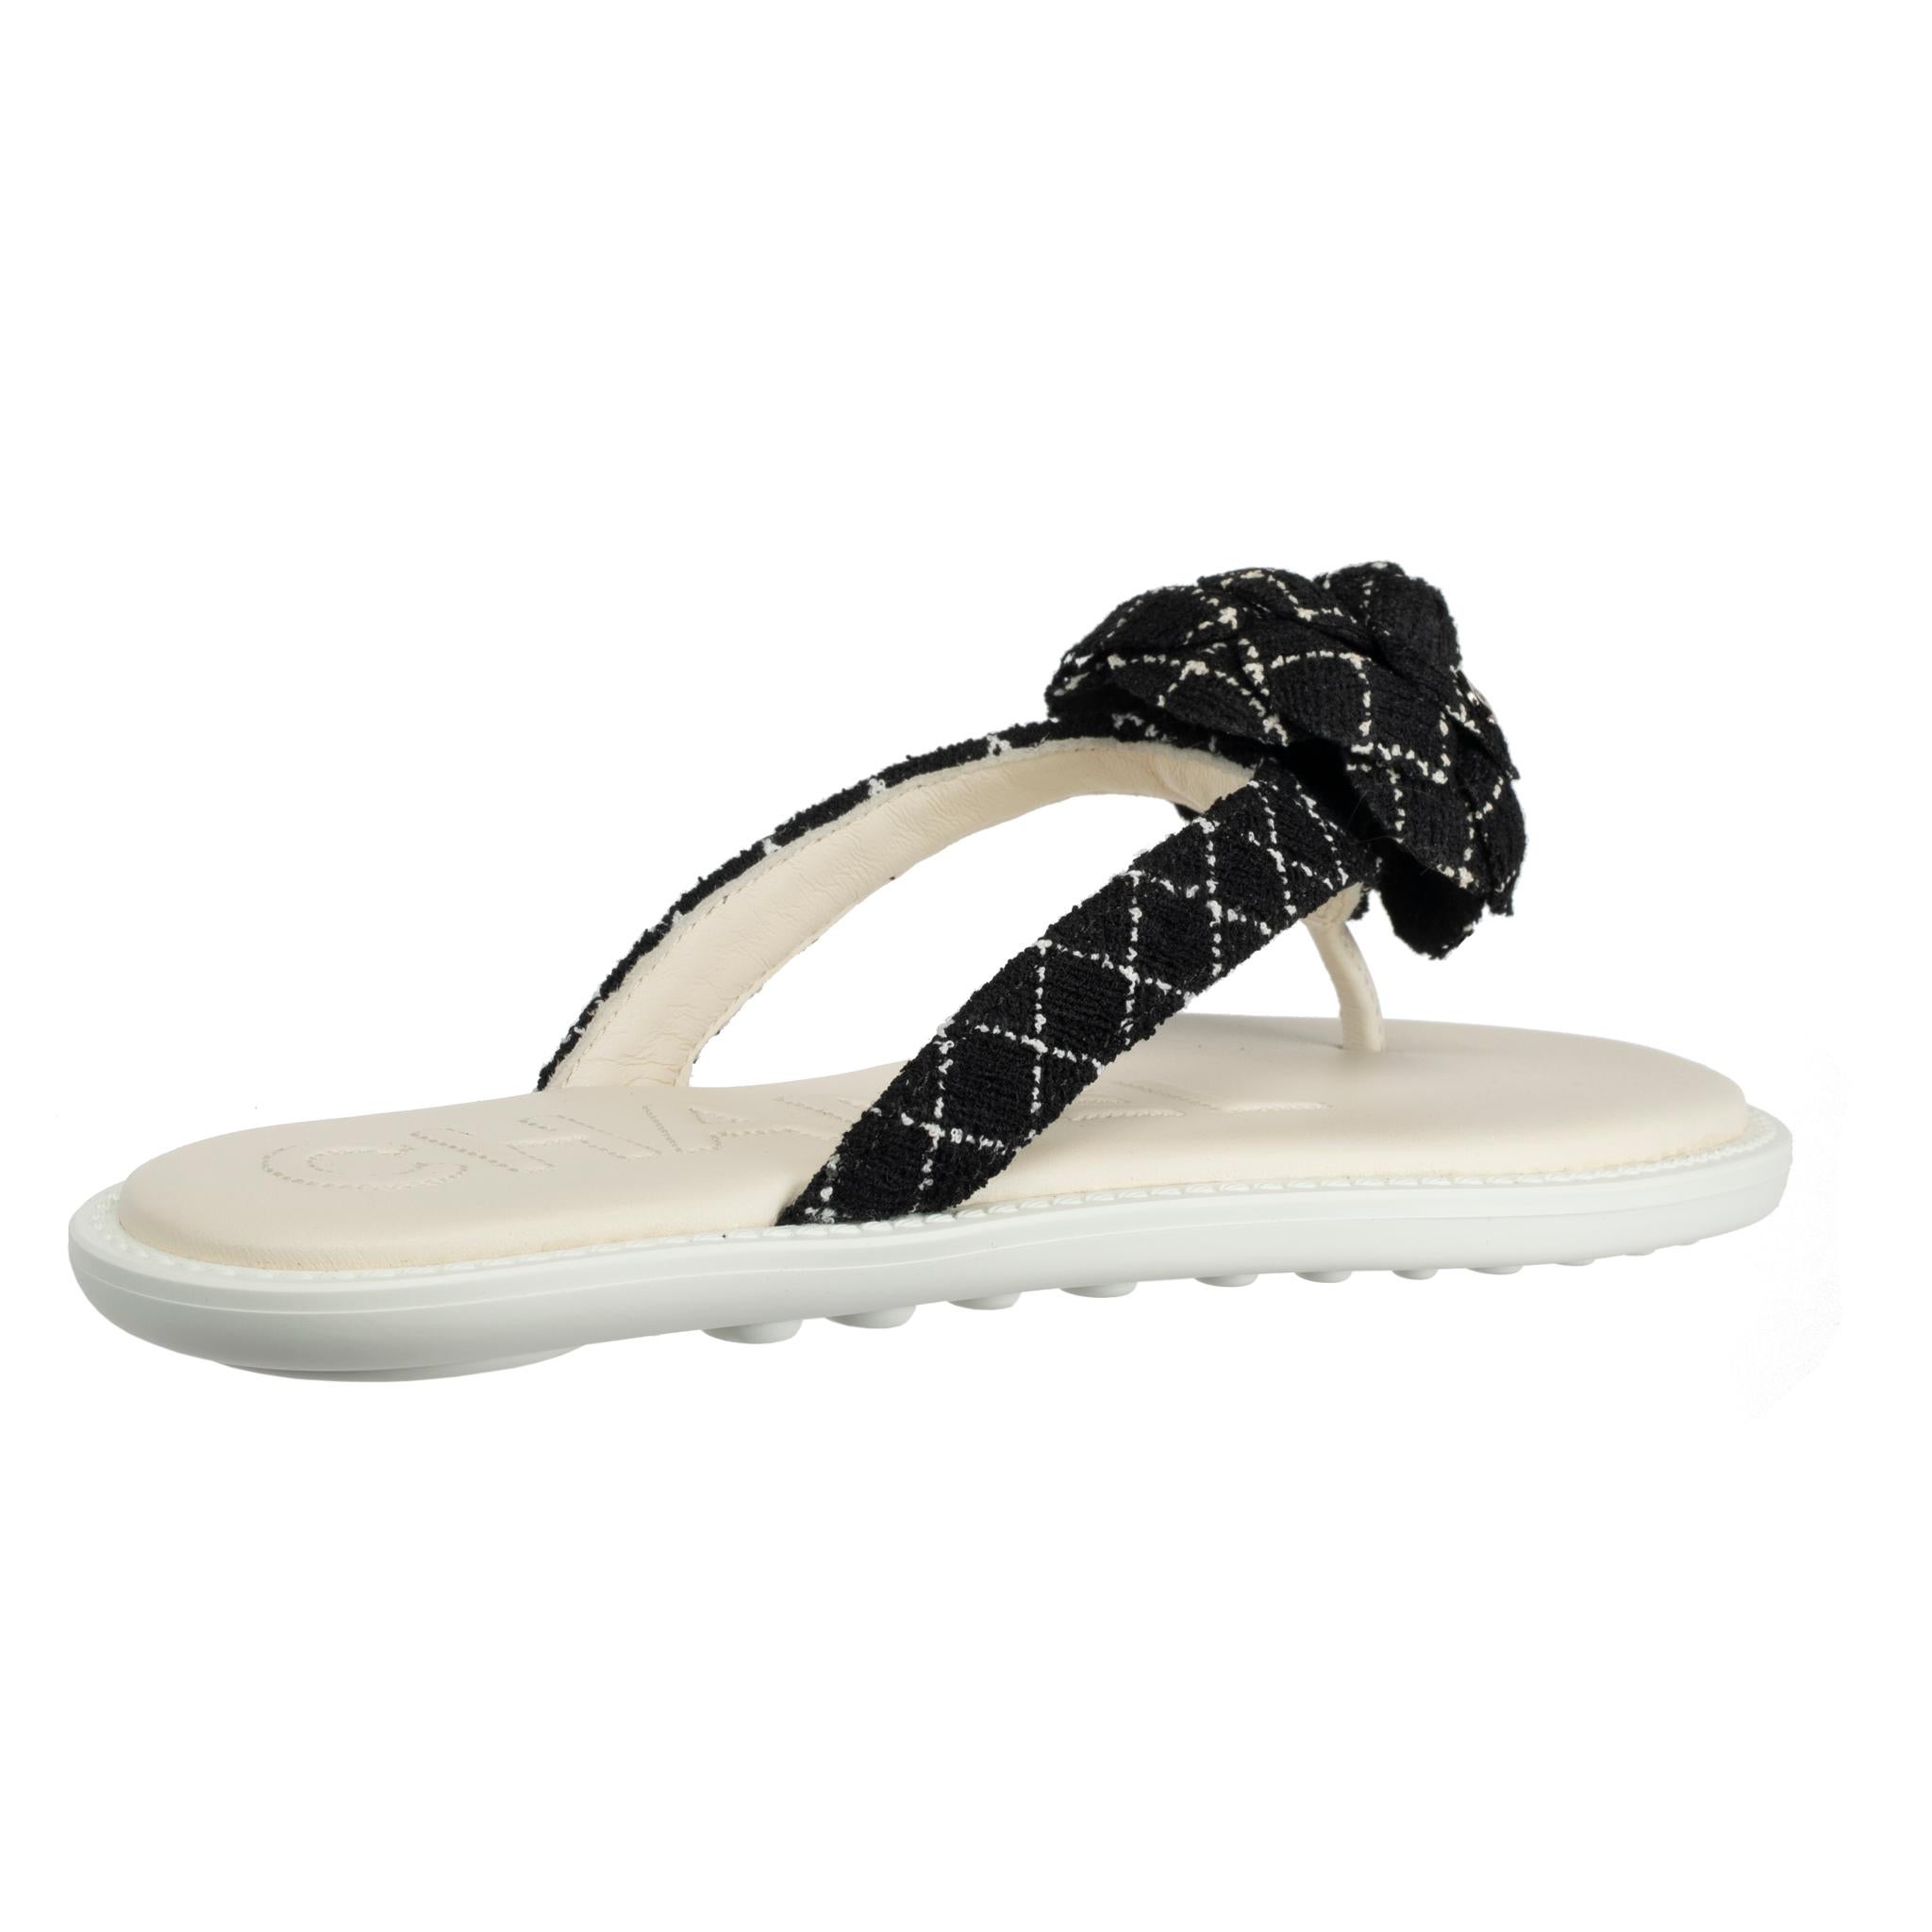 Brand:

Chanel

Product:

Camelia Sandal

Size:

37 Fr

Colour:

Black & White

Material:

Smooth Leather, Tweed And Rubber Sole

Condition:

Pristine; New Or Never Worn

Accompanied By:

Chanel Box & Two Chanel Dustbags

*Please note box is